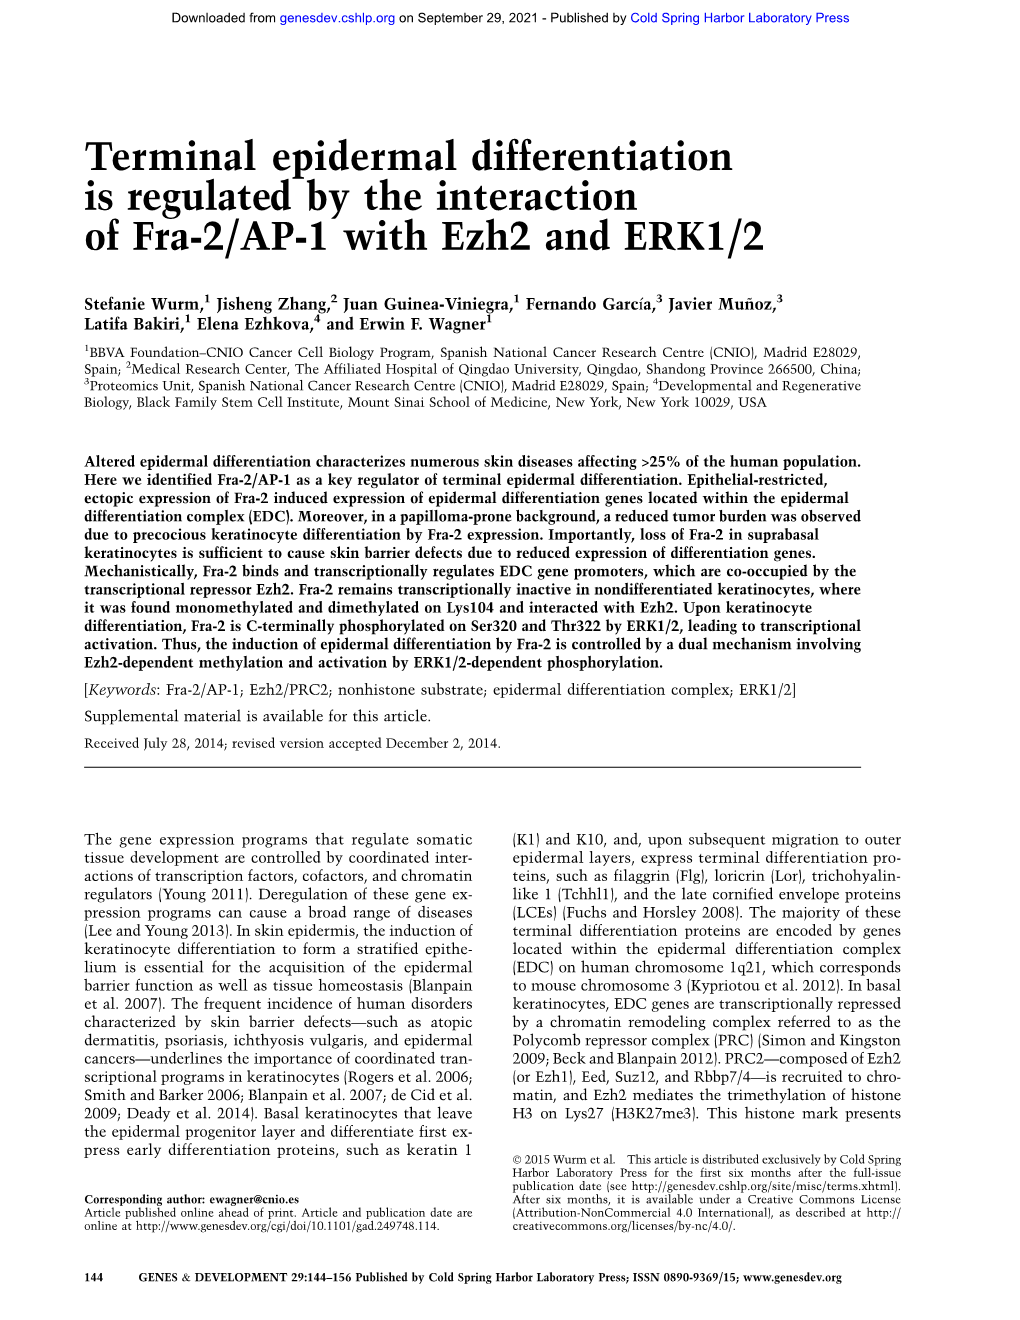 Terminal Epidermal Differentiation Is Regulated by the Interaction of Fra-2/AP-1 with Ezh2 and ERK1/2